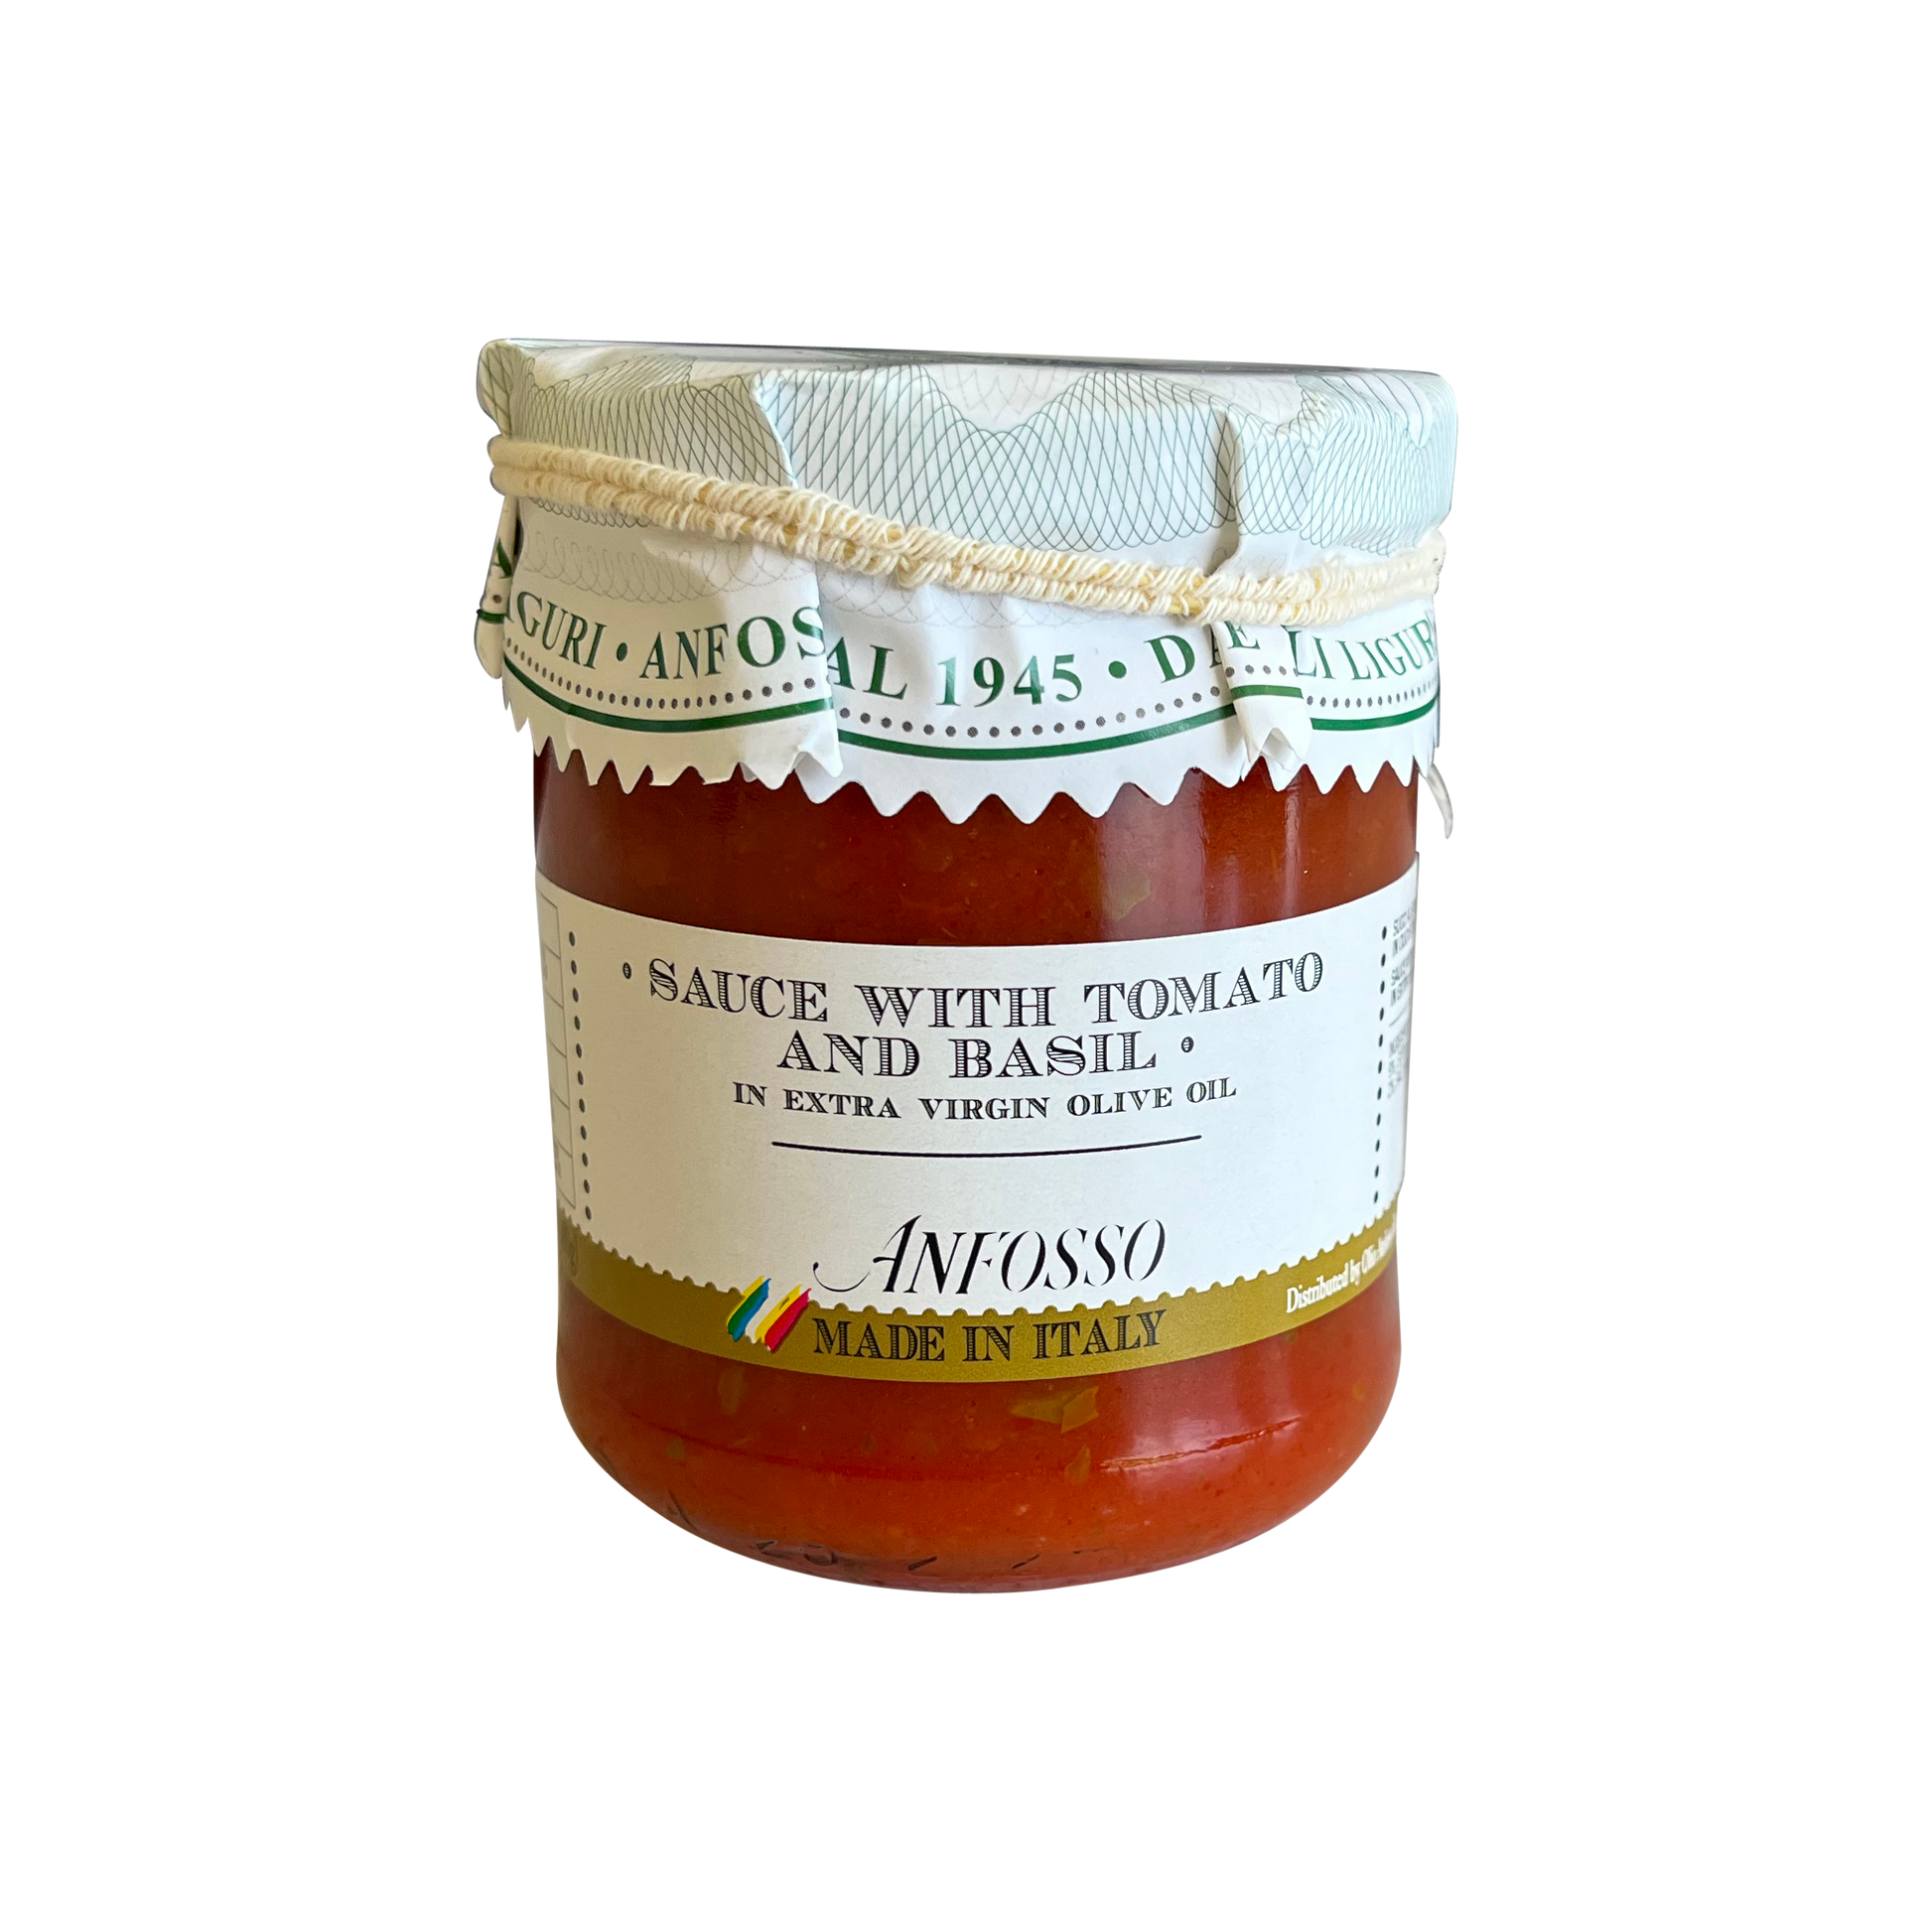 Anfosso Tomato Sauce with Basil CDV-005